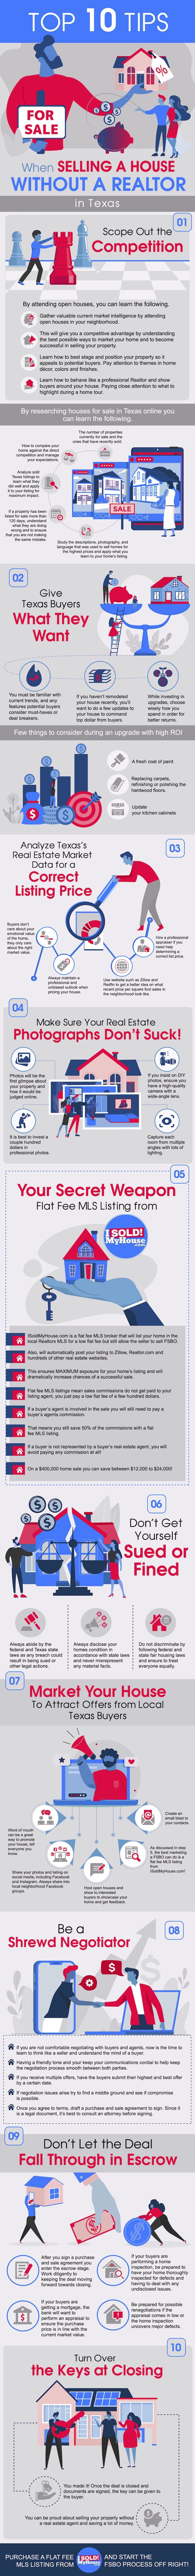 infographic of the 10 steps to sell a house in texas without an agent